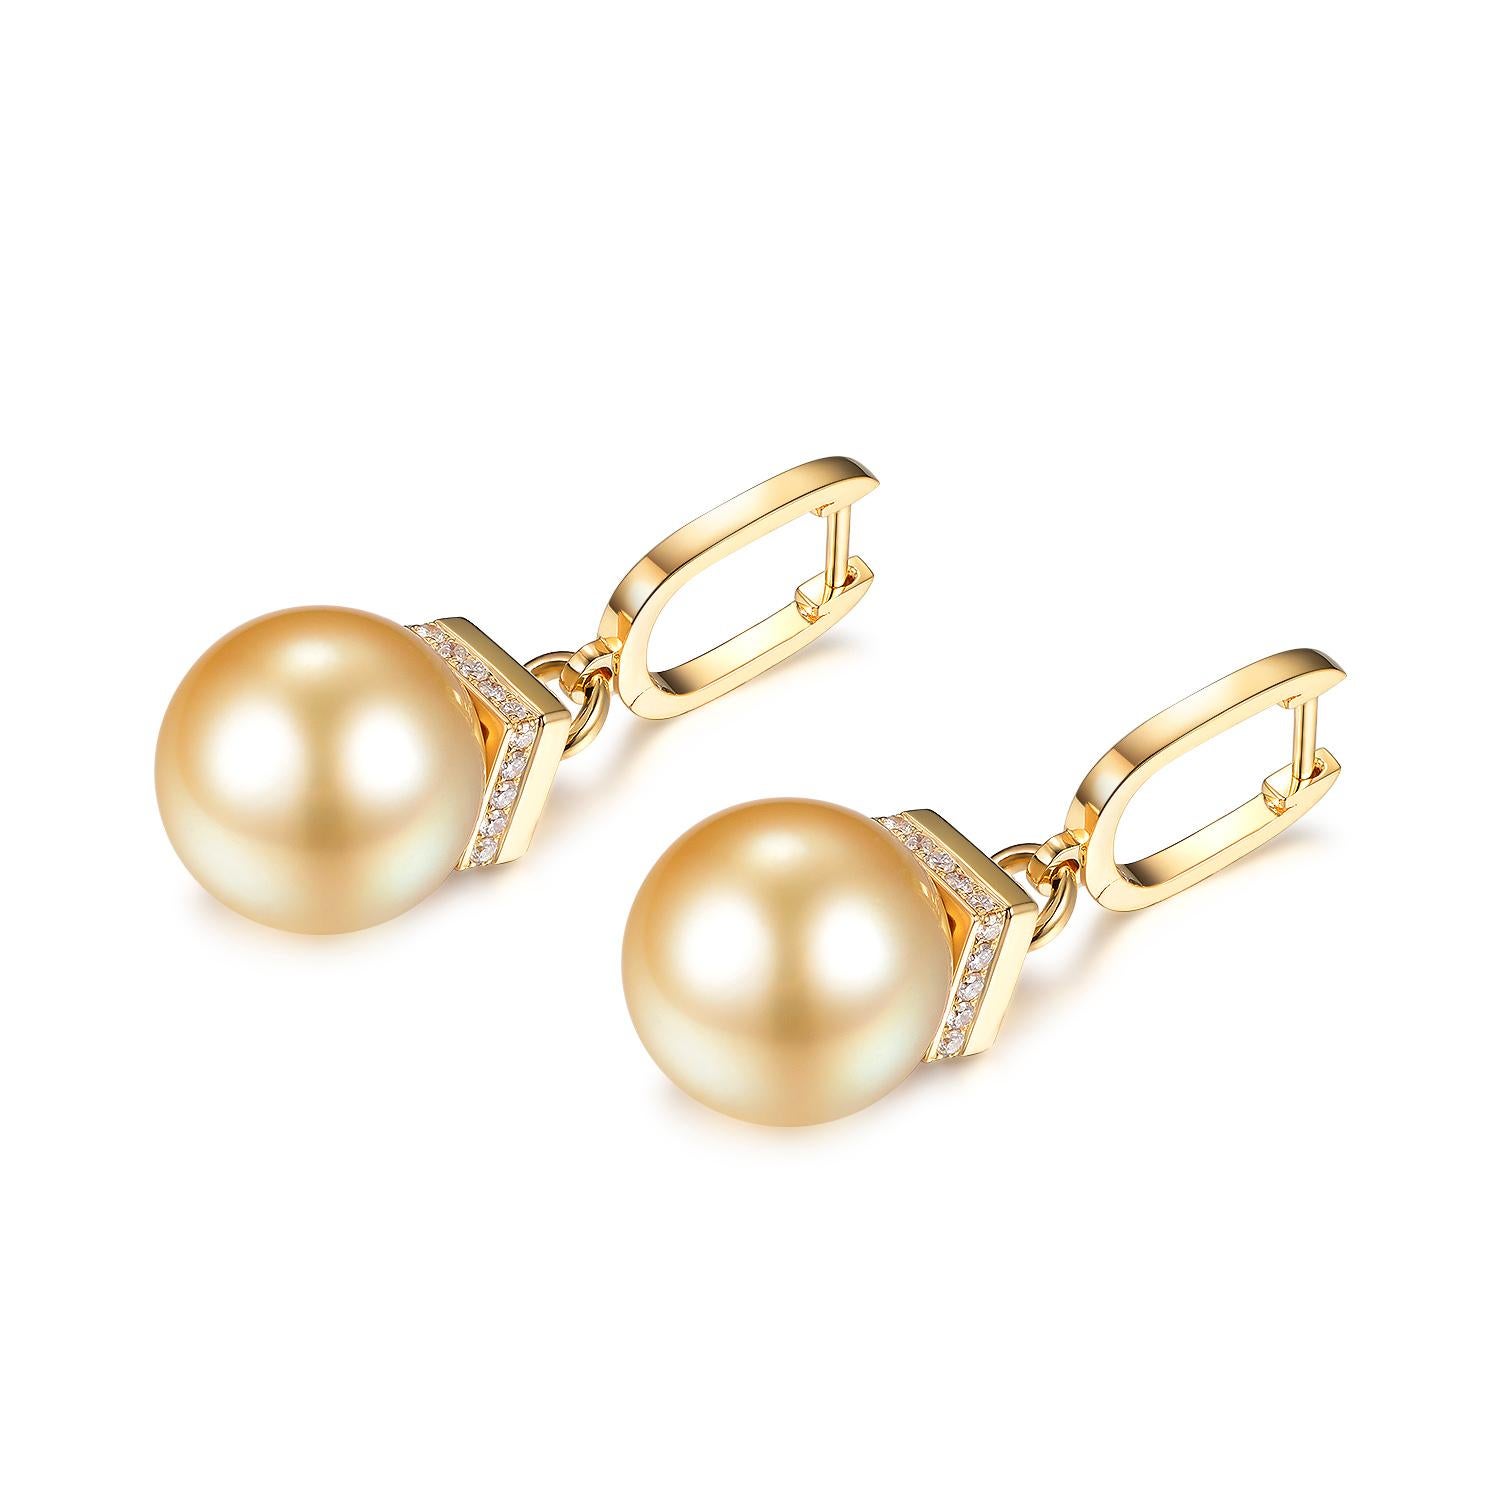 These exquisite South Sea Pearl Diamond Drop Earrings in 18 Karat Yellow Gold are a luxurious addition to any fine jewelry collection. The South Sea pearls, renowned for their size and luster, are the stars of this elegant design. Weighing in at